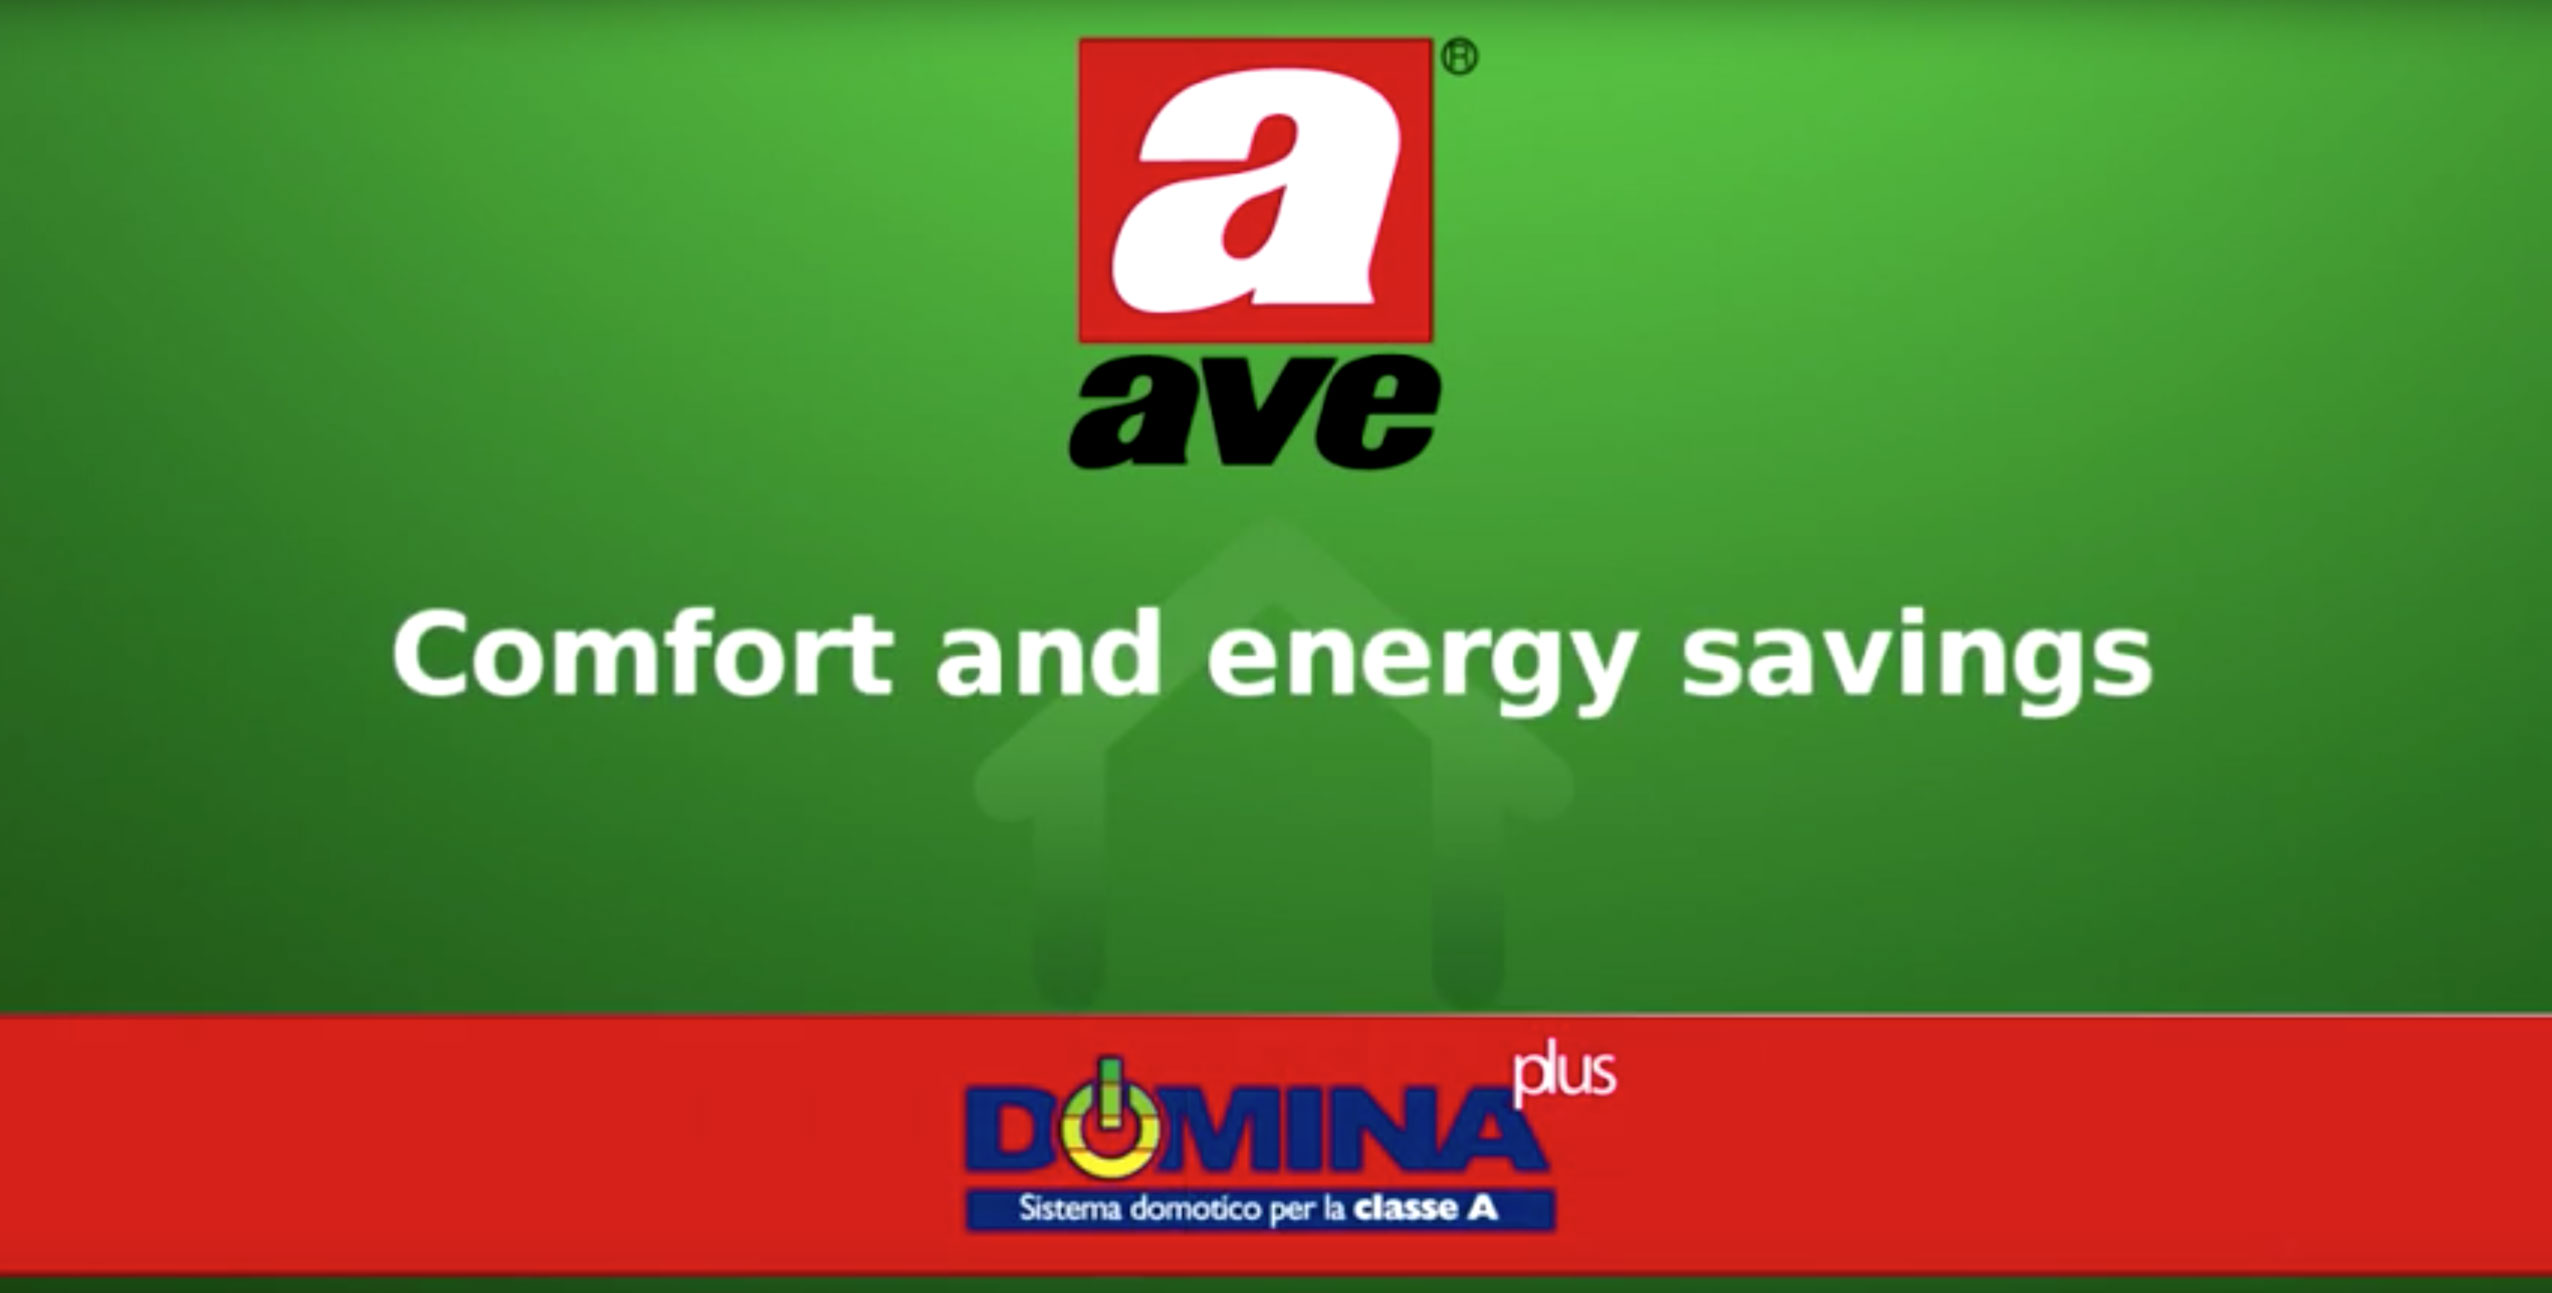 Home automation AVE DOMINA plus – Comfort and energy savings video